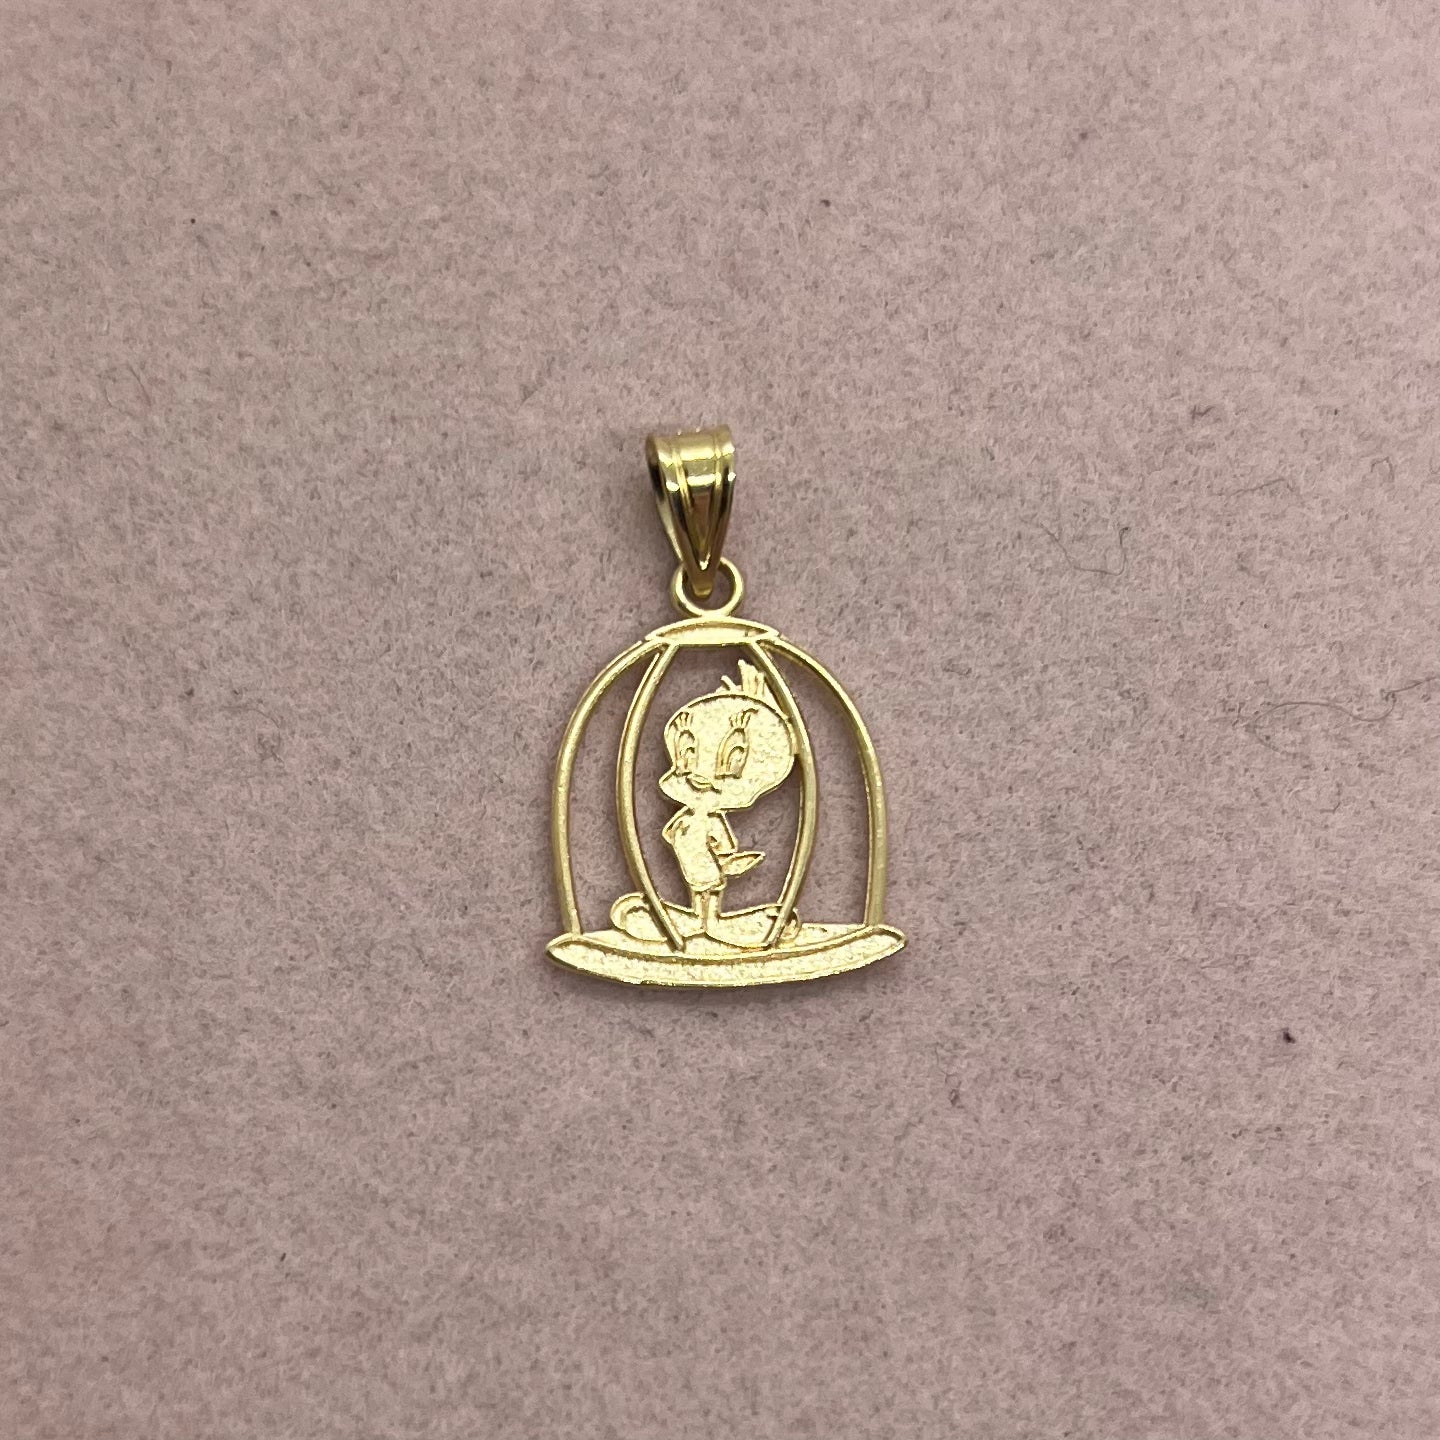 Tweety Bird in Cage Pendant by Michael Anthony (Reformation Exclusive)